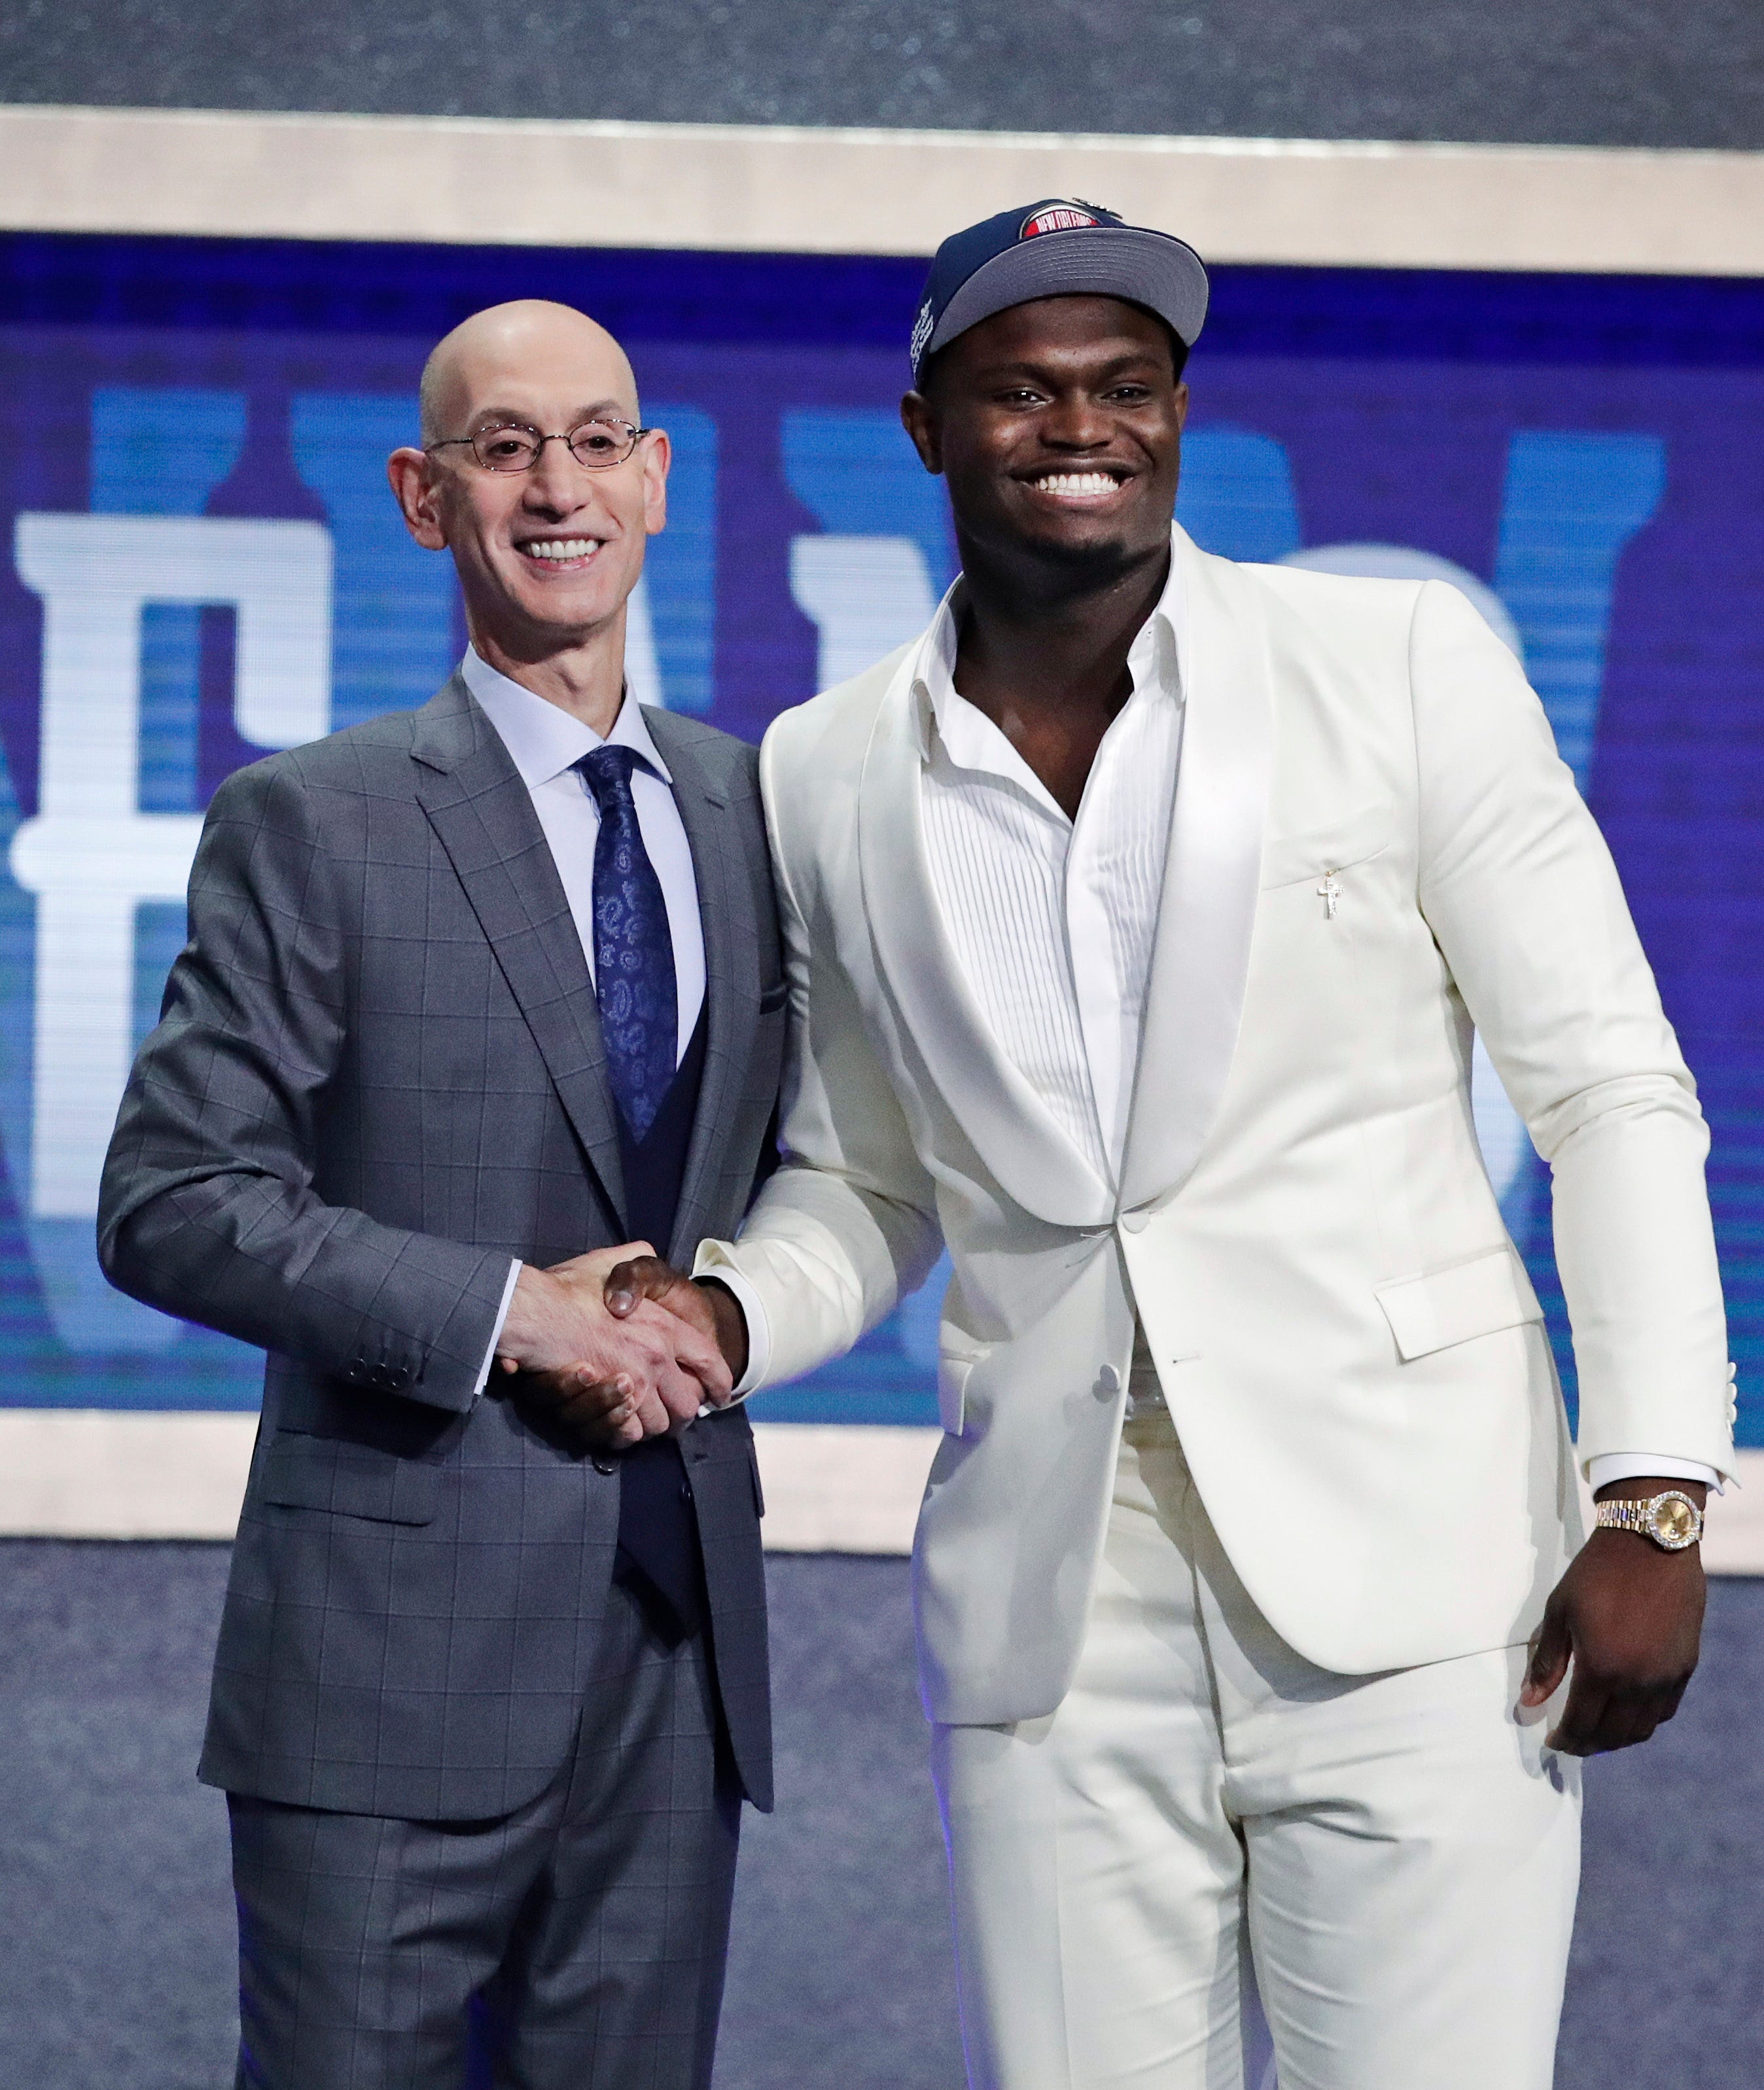 Duke's Zion Williamson, right, poses for photographs with NBA Commissioner Adam Silver after being selected by the New Orleans Pelicans with the first pick in the NBA Draft Thursday.